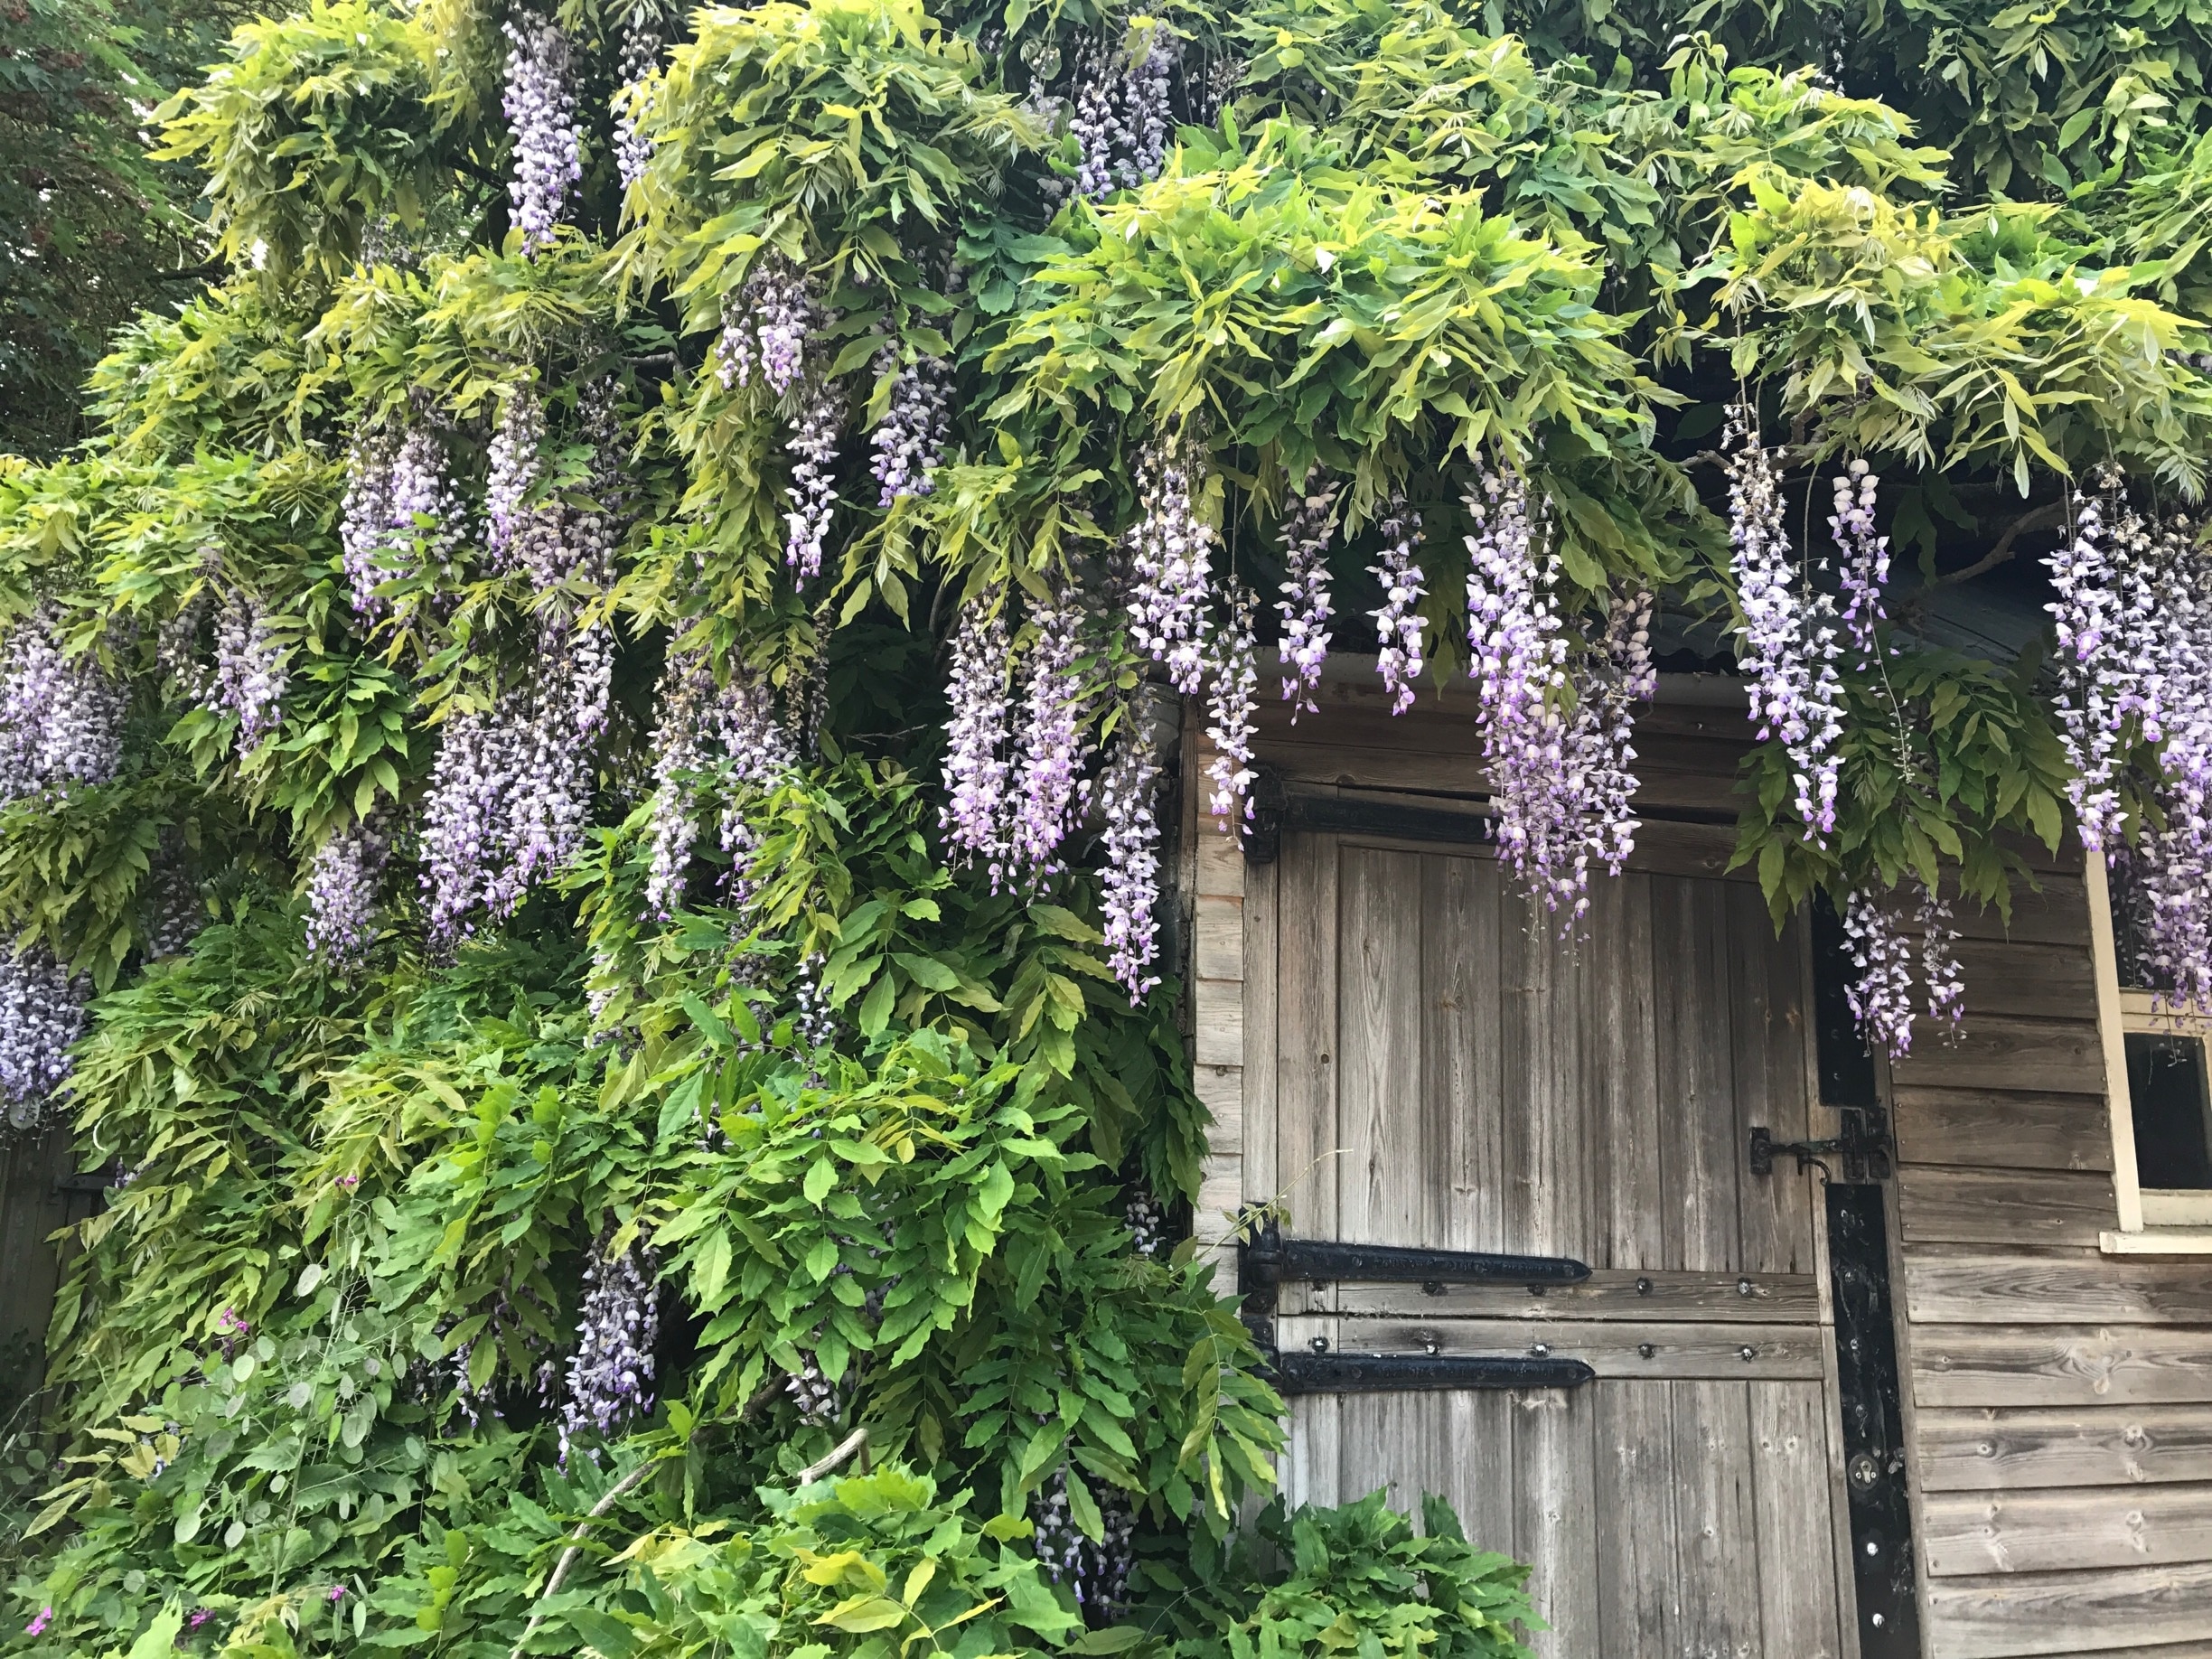 The fragrance of the wisteria is intoxicating. 